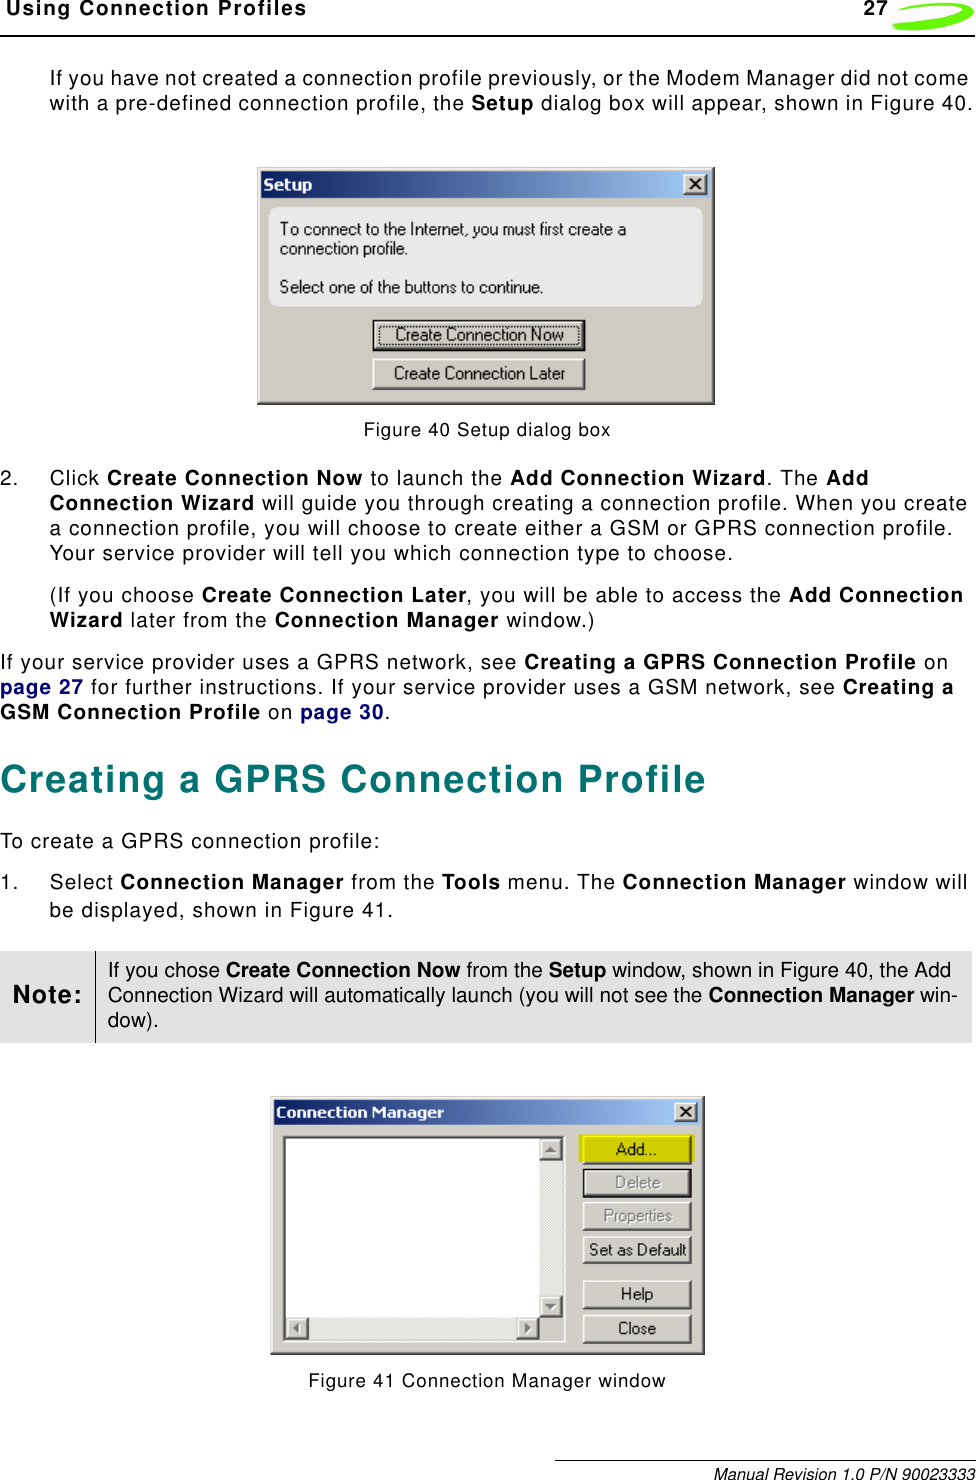  Using Connection Profiles 27Manual Revision 1.0 P/N 90023333If you have not created a connection profile previously, or the Modem Manager did not come with a pre-defined connection profile, the Setup dialog box will appear, shown in Figure 40.Figure 40 Setup dialog box2. Click Create Connection Now to launch the Add Connection Wizard. The Add Connection Wizard will guide you through creating a connection profile. When you create a connection profile, you will choose to create either a GSM or GPRS connection profile. Your service provider will tell you which connection type to choose.(If you choose Create Connection Later, you will be able to access the Add Connection Wizard later from the Connection Manager window.)If your service provider uses a GPRS network, see Creating a GPRS Connection Profile on page 27 for further instructions. If your service provider uses a GSM network, see Creating a GSM Connection Profile on page 30.Creating a GPRS Connection ProfileTo create a GPRS connection profile:1. Select Connection Manager from the Tools menu. The Connection Manager window will be displayed, shown in Figure 41.Figure 41 Connection Manager windowNote: If you chose Create Connection Now from the Setup window, shown in Figure 40, the Add Connection Wizard will automatically launch (you will not see the Connection Manager win-dow).